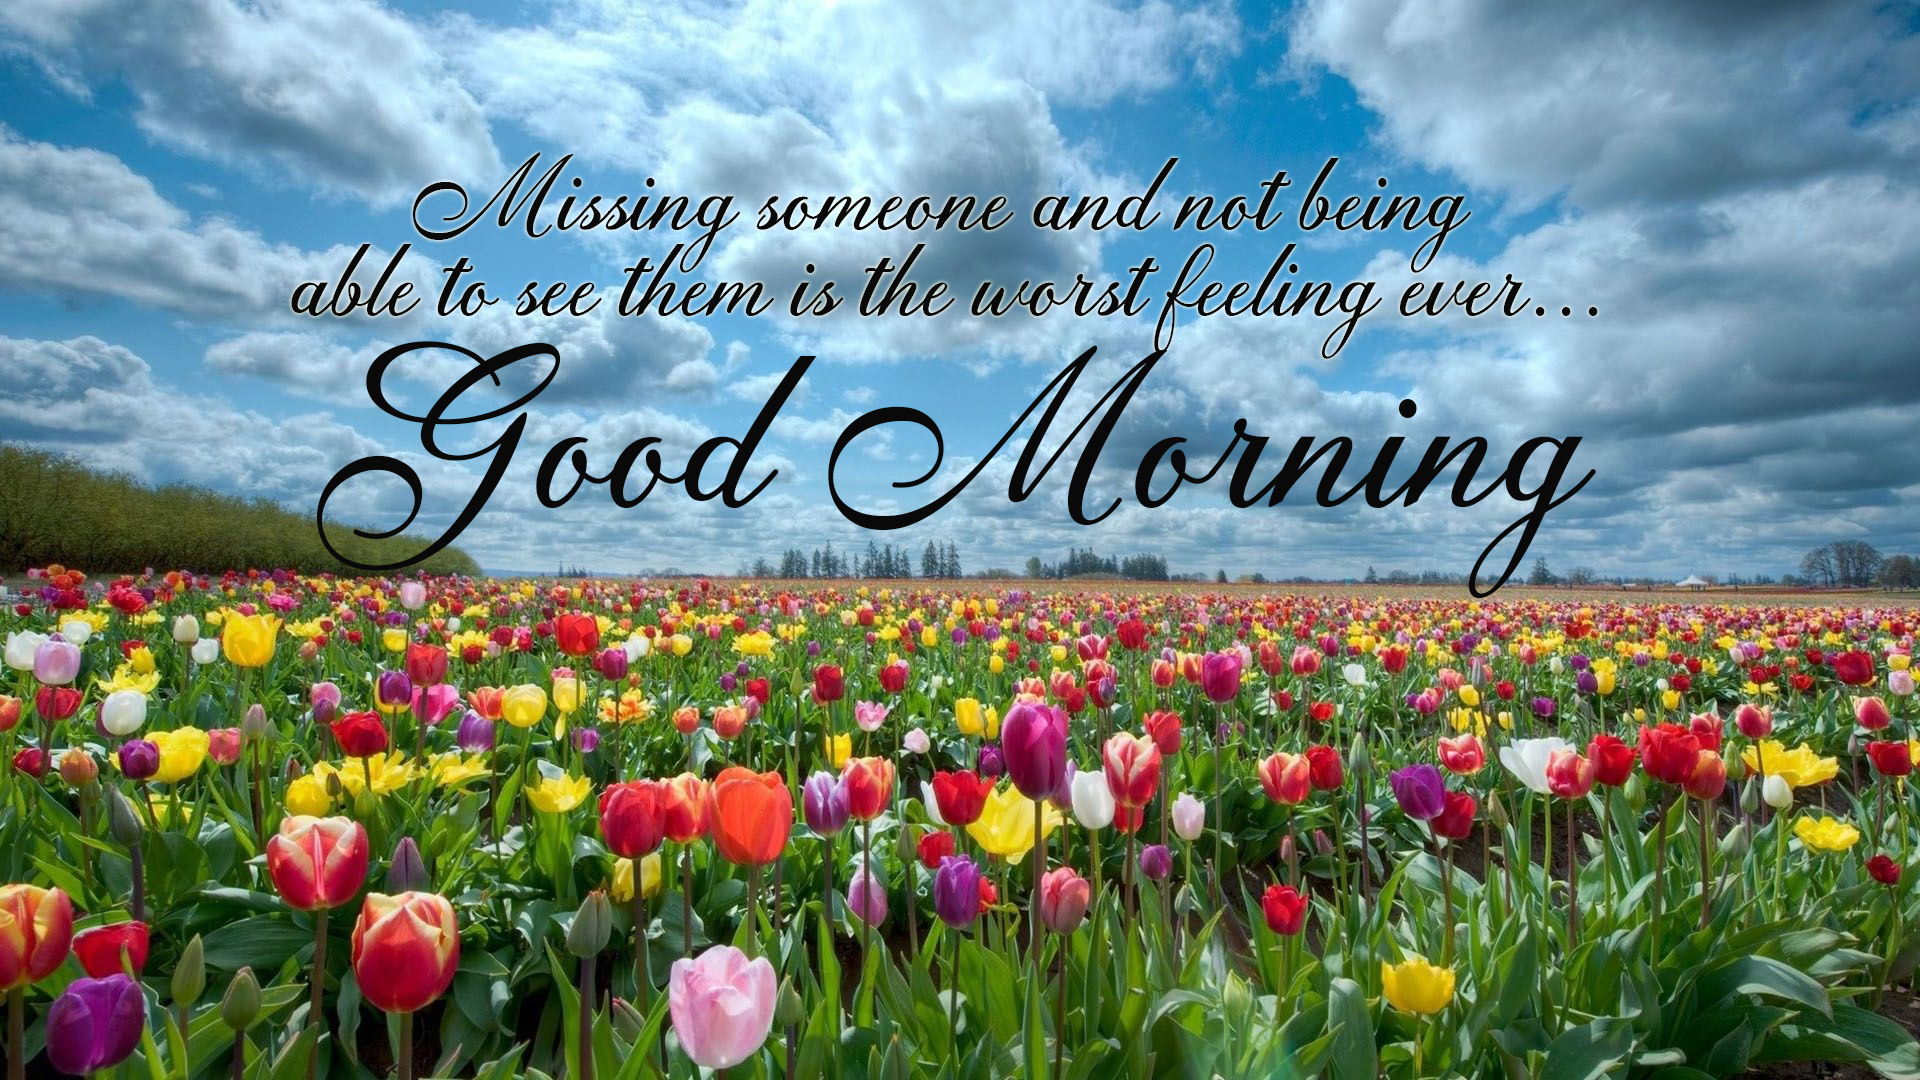 good-morning-wallpapers-miss-you